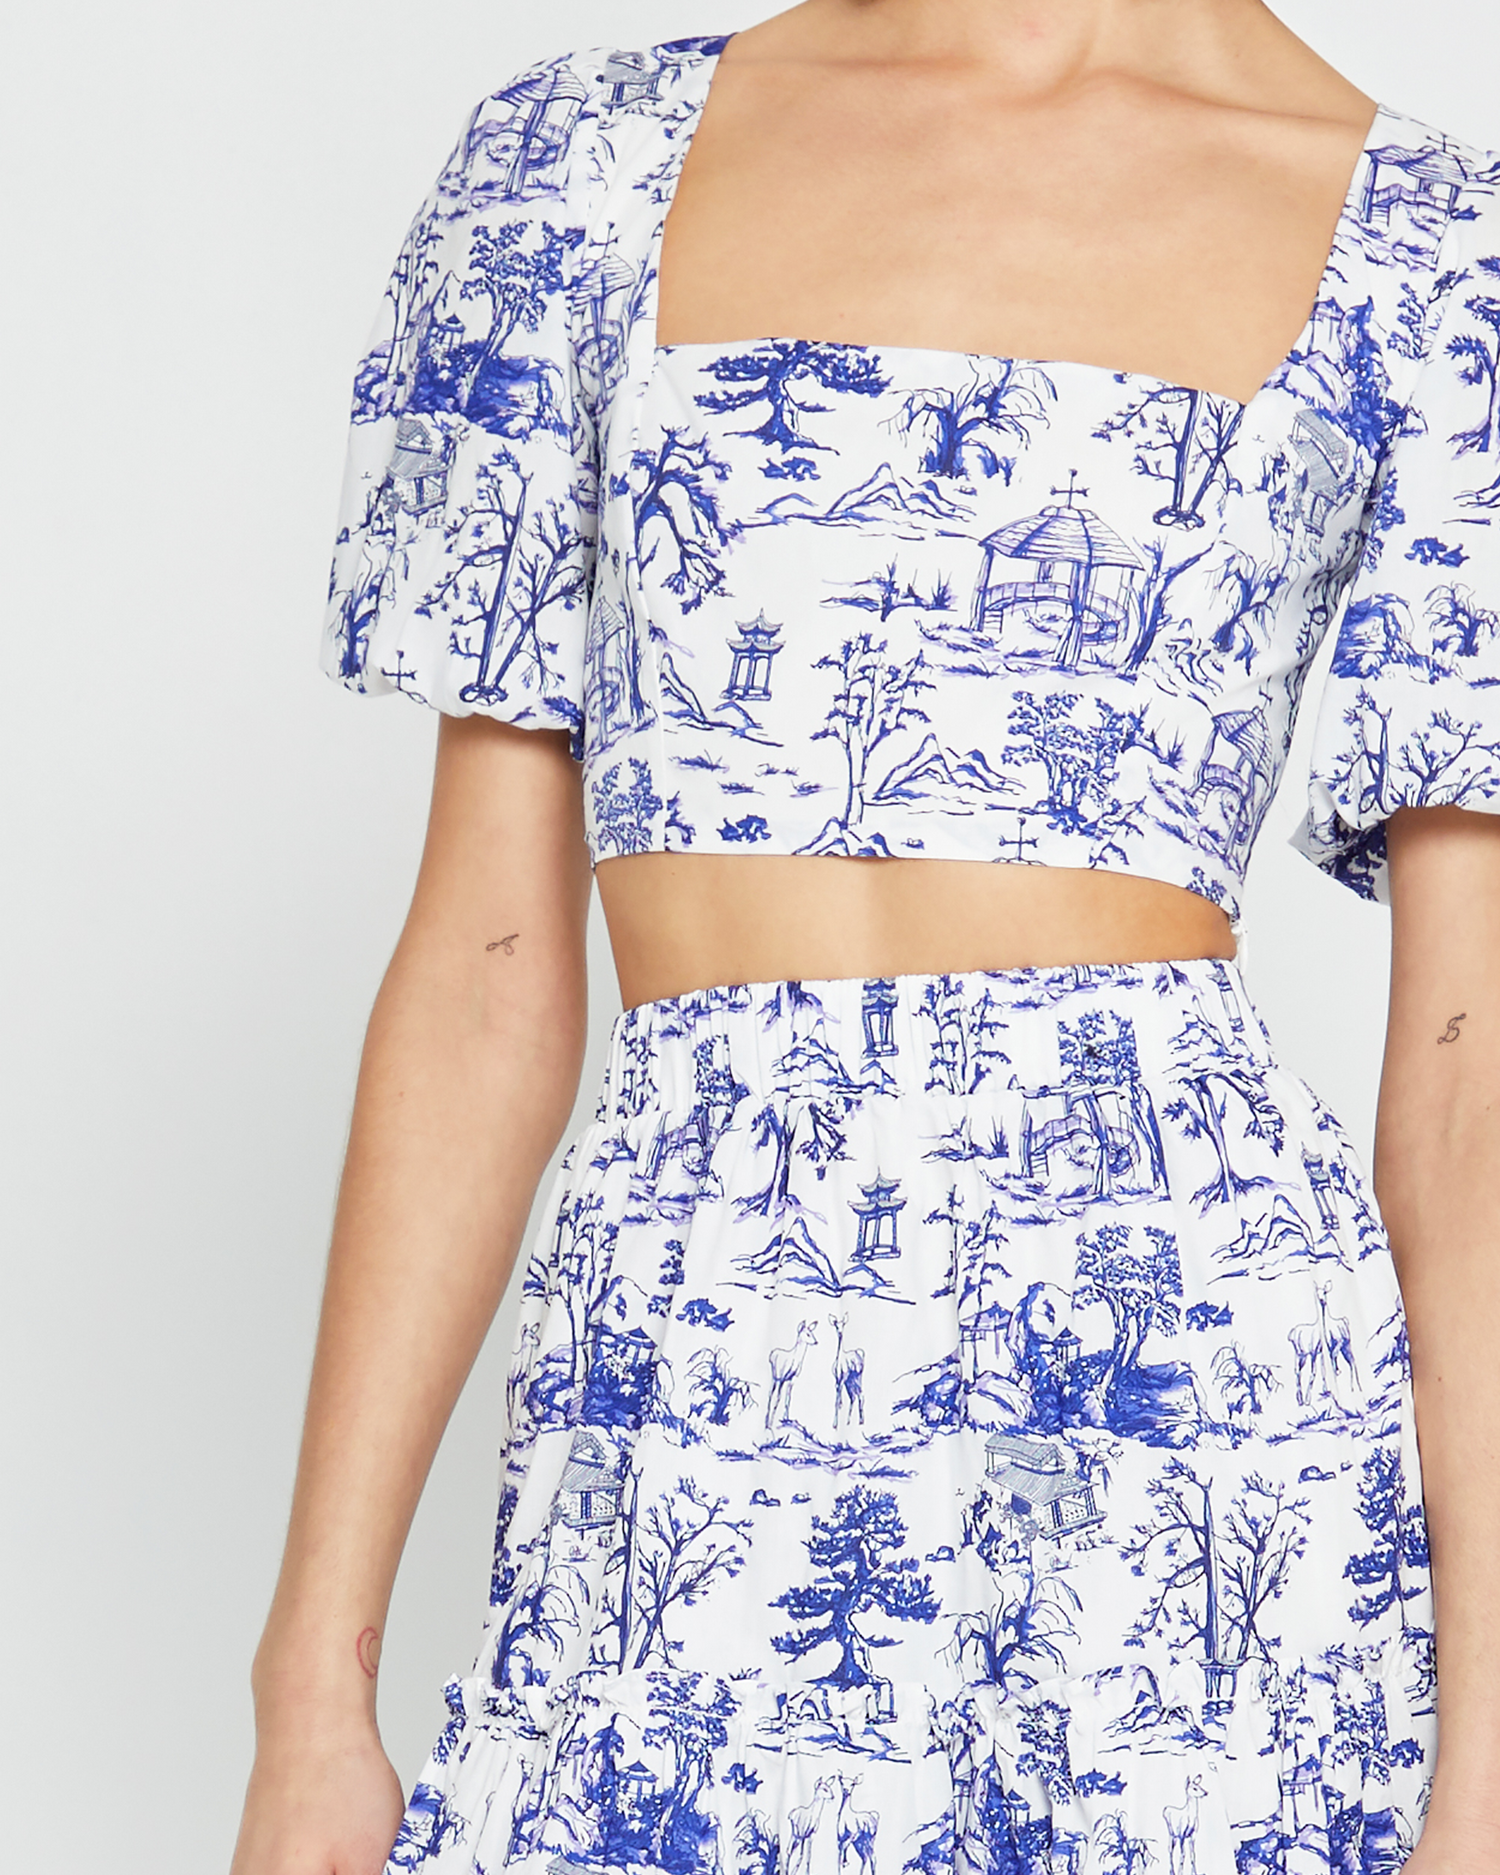 These Women's 2 Piece Sets for Vacation Are So Fashionable and Comfy